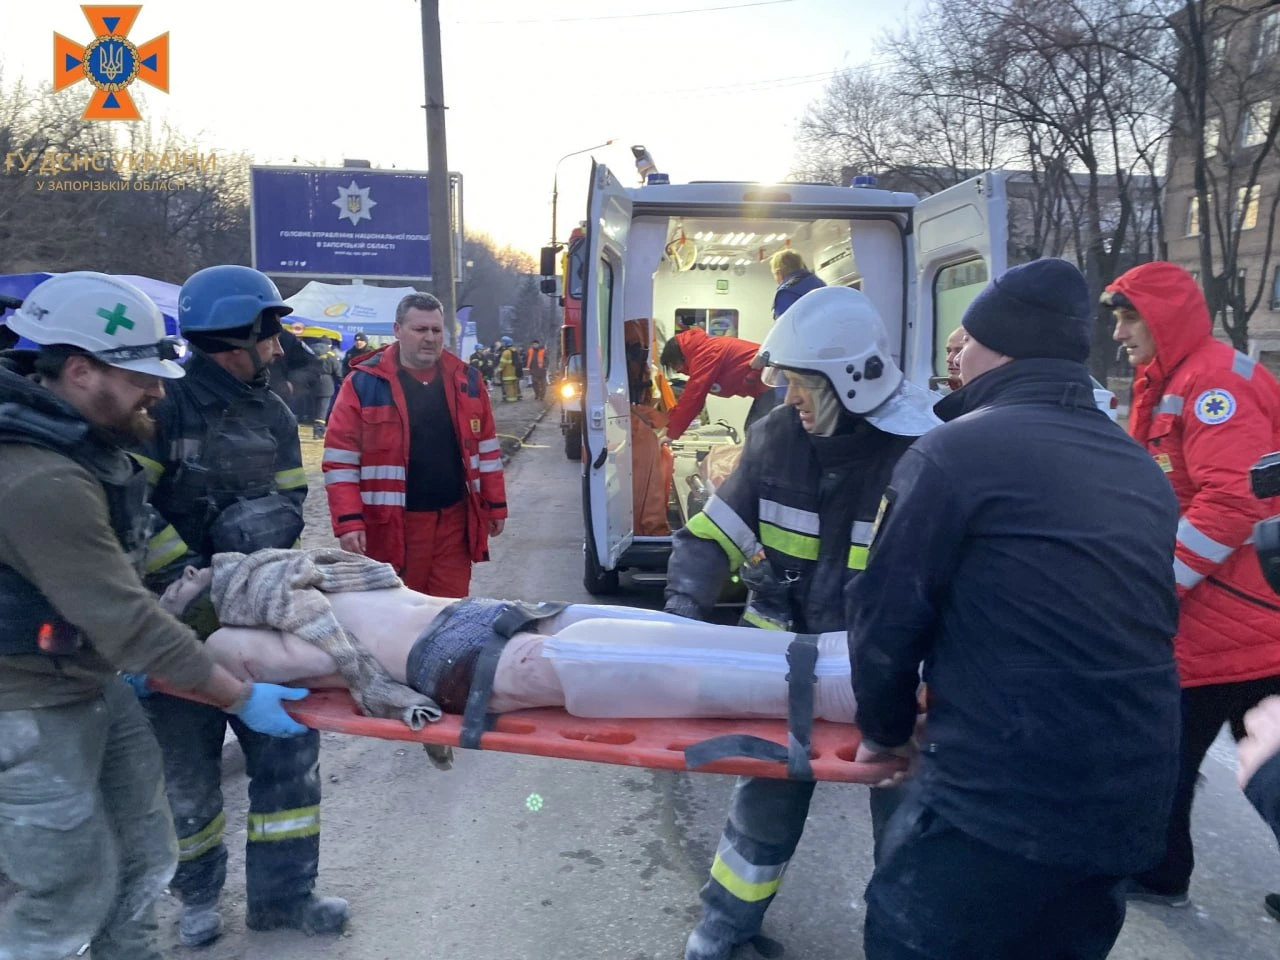 Saving operation continues all night and morning after russian war crimes in Zaporizhzhya